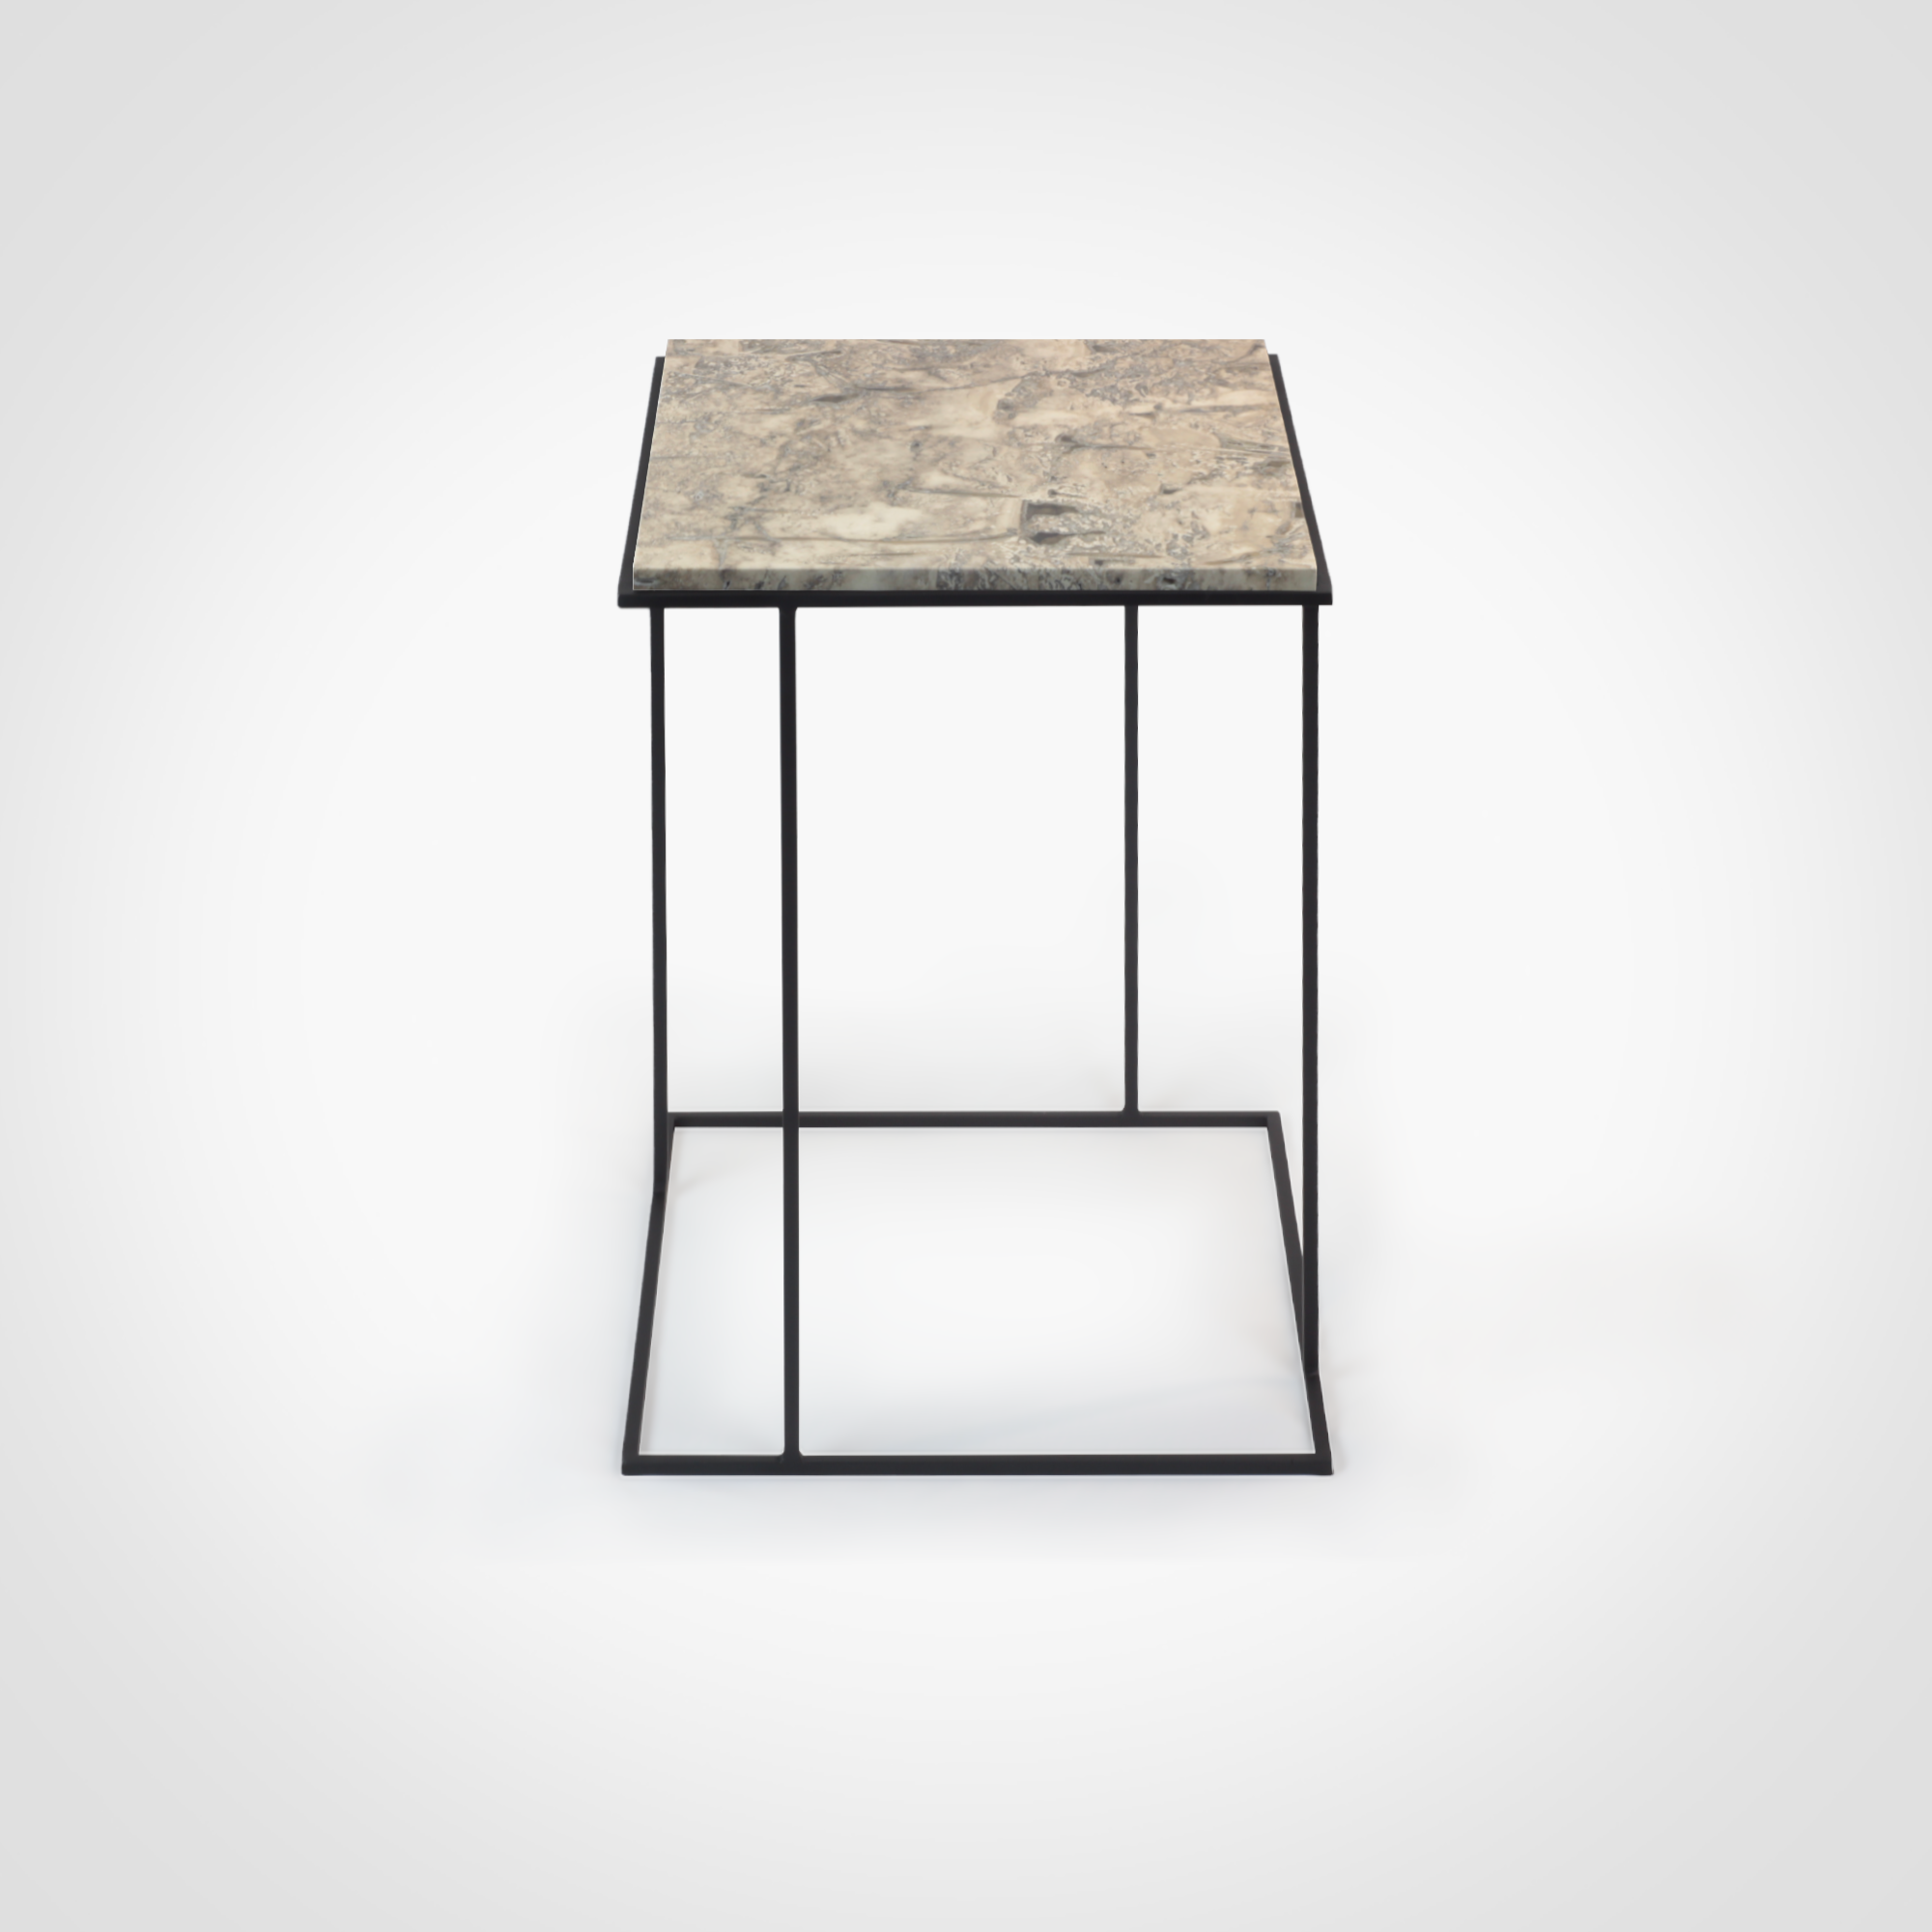 FramE - Fossil travertine side table